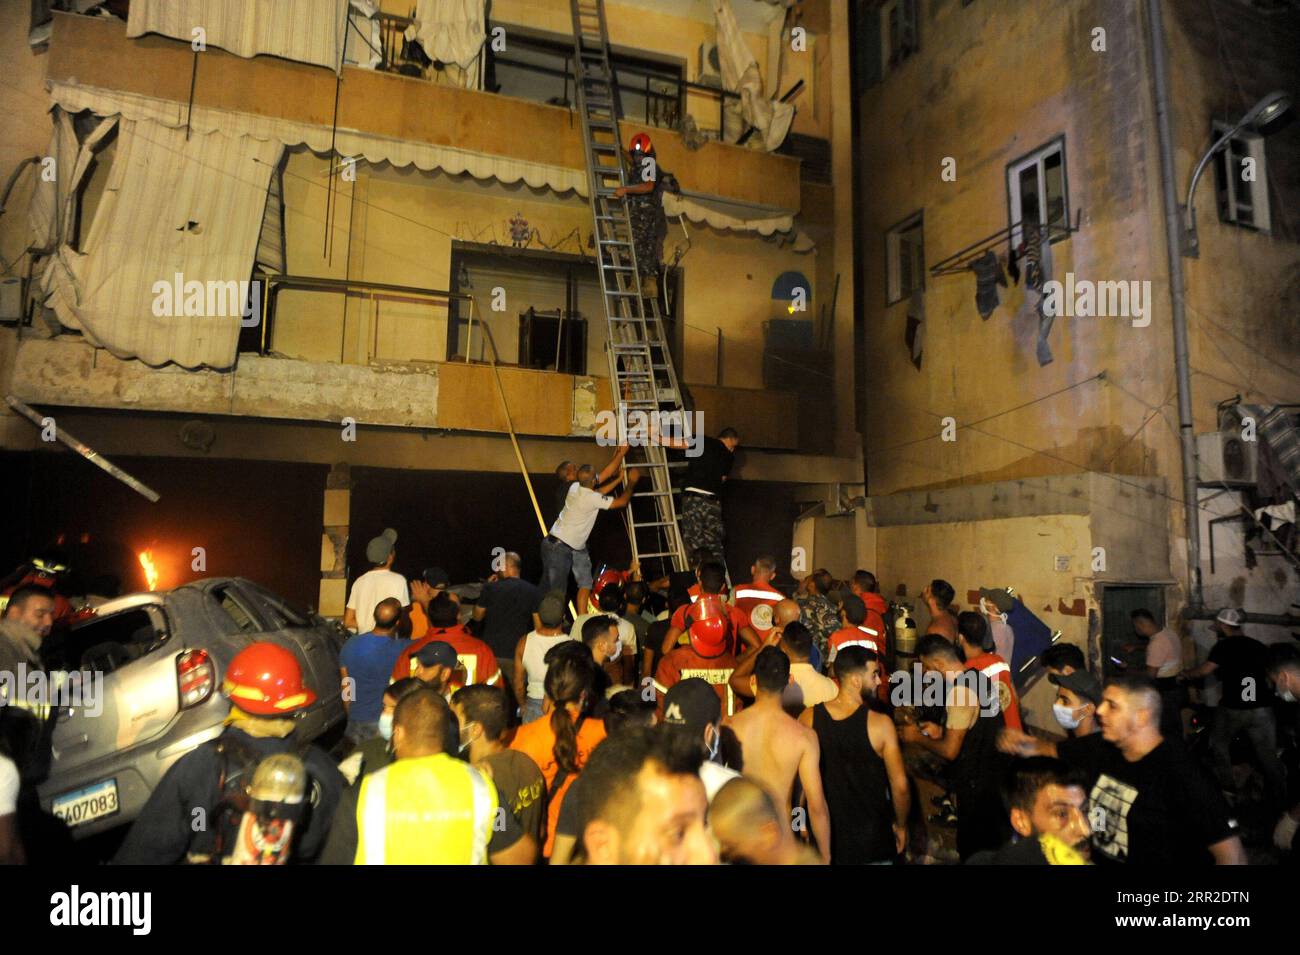 201009 -- BEIRUT, Oct. 9, 2020 -- Civil defense members help people evacuate from a building after a warehouse explosion in Tariq El Jdide neighborhood in Beirut, Lebanon, Oct. 9, 2020. Two people were dead and more than 20 others injured in an explosion at a warehouse in Lebanon s capital Beirut on Friday night, al-Jadeed TV channel reported.  LEBANON-BEIRUT-WAREHOUSE EXPLOSION BilalxJawich PUBLICATIONxNOTxINxCHN Stock Photo